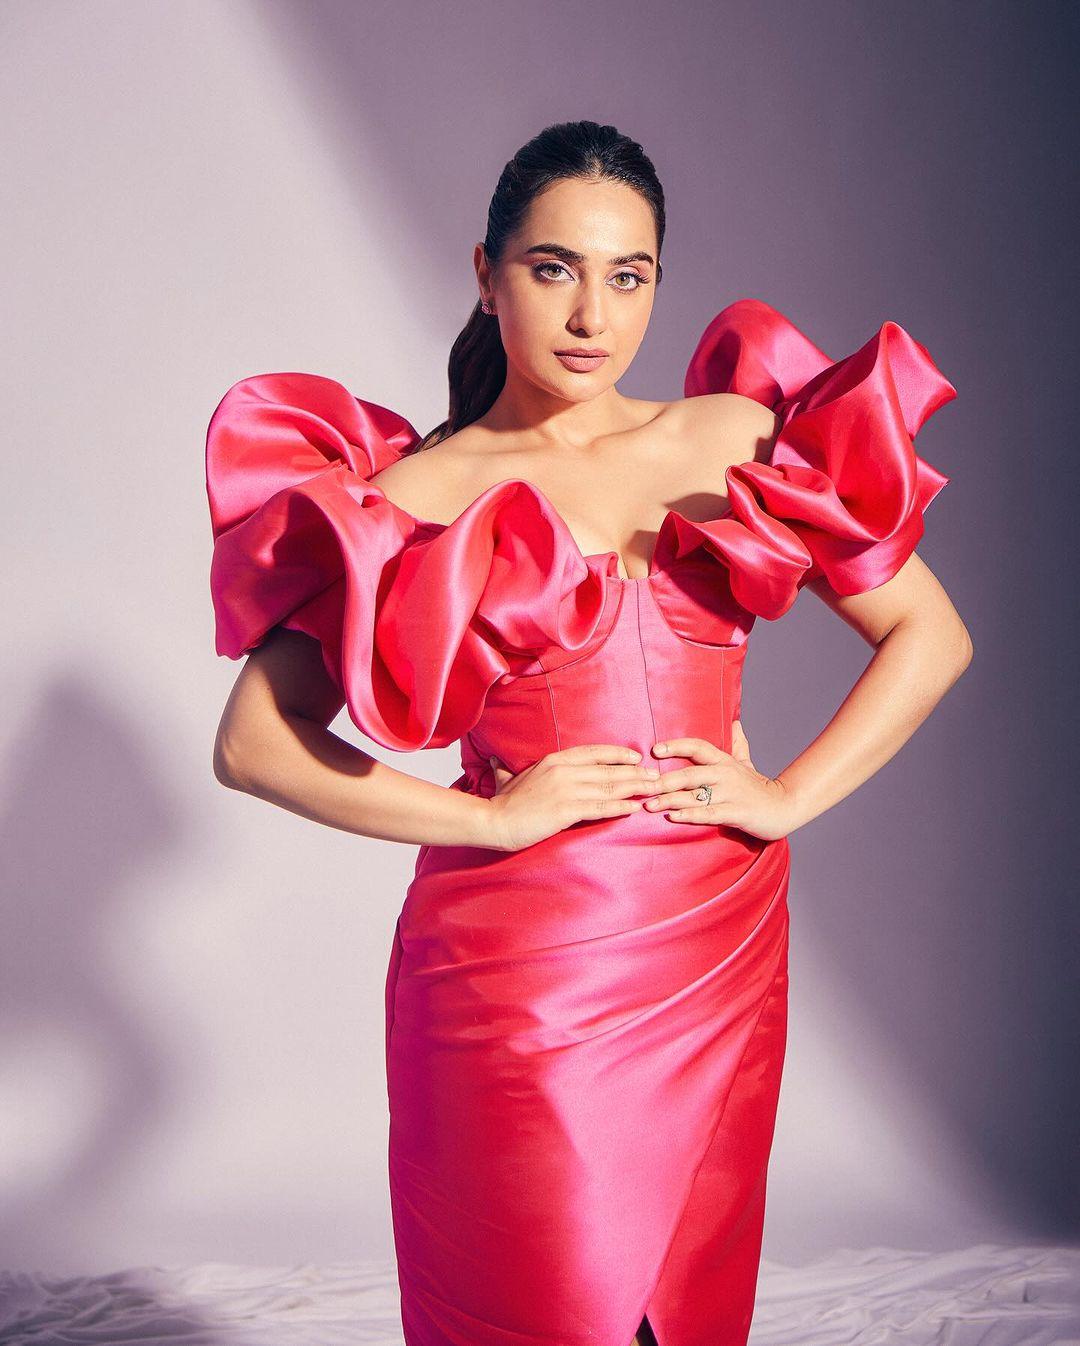 Kusha Kapila made quite the statement in a glossy pink dress that hugged her figure elegantly. The dress featured dramatic balloon sleeves, adding a touch of dramatic flair to her overall look. 